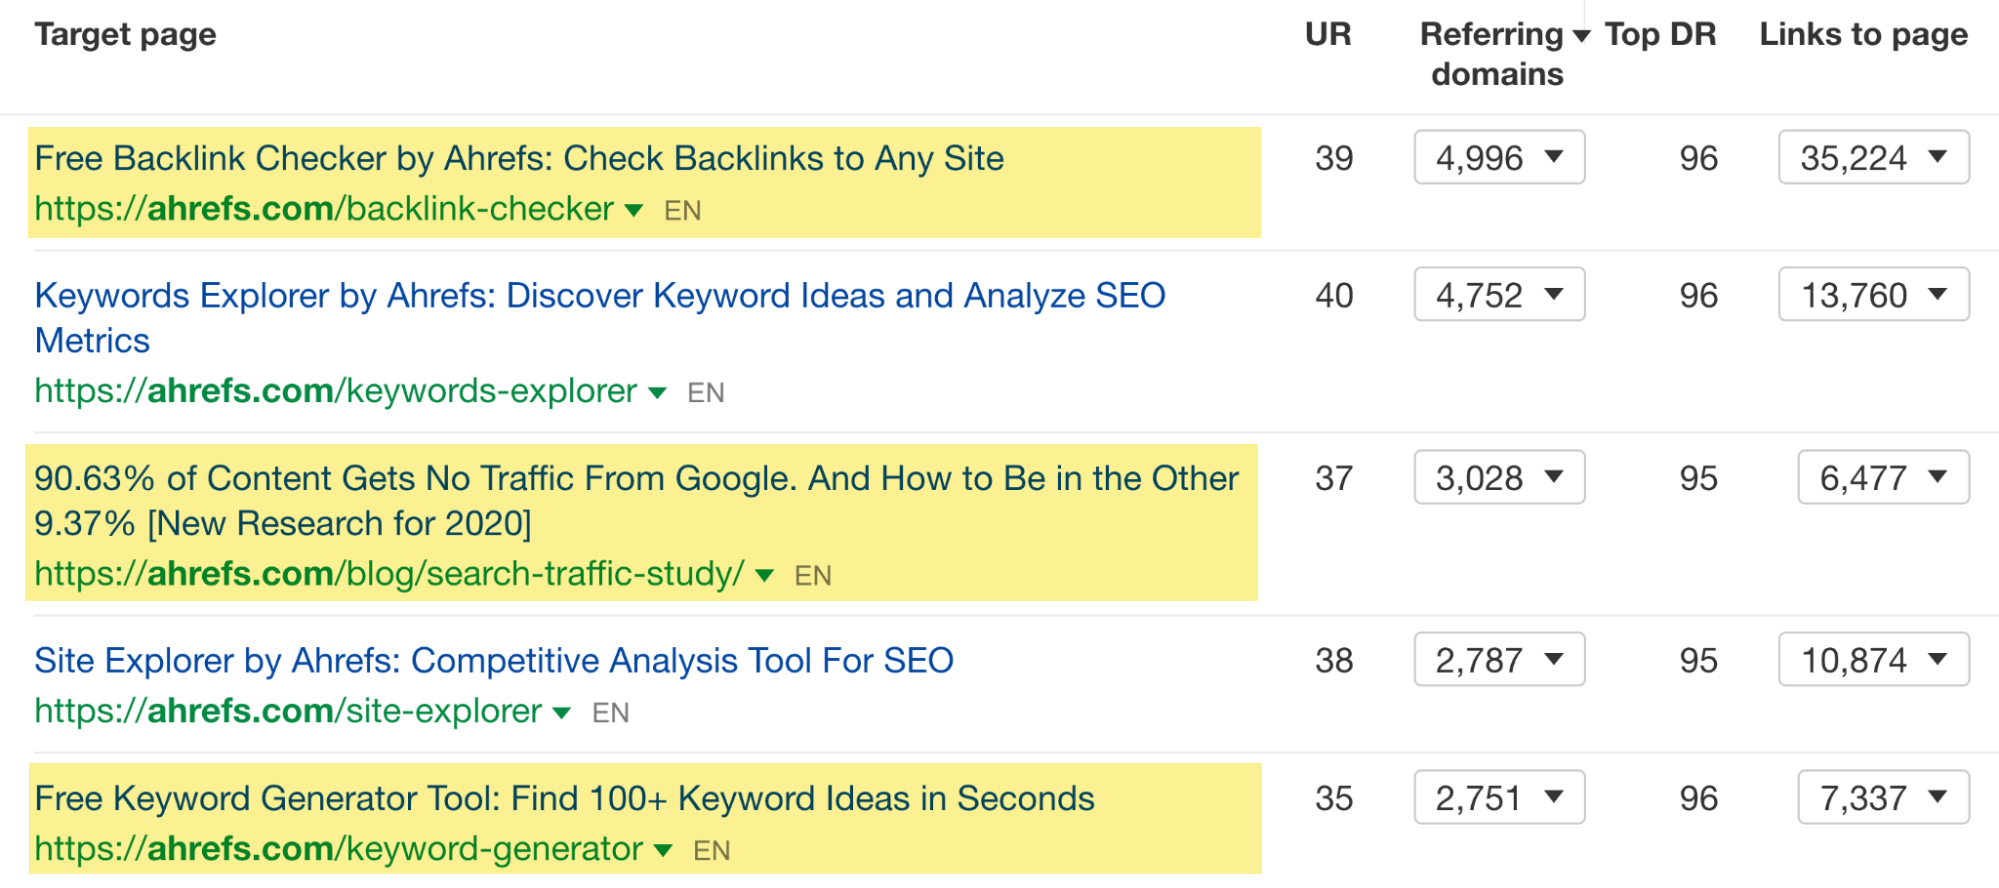 Best by links report in Ahrefs' Site Explorer